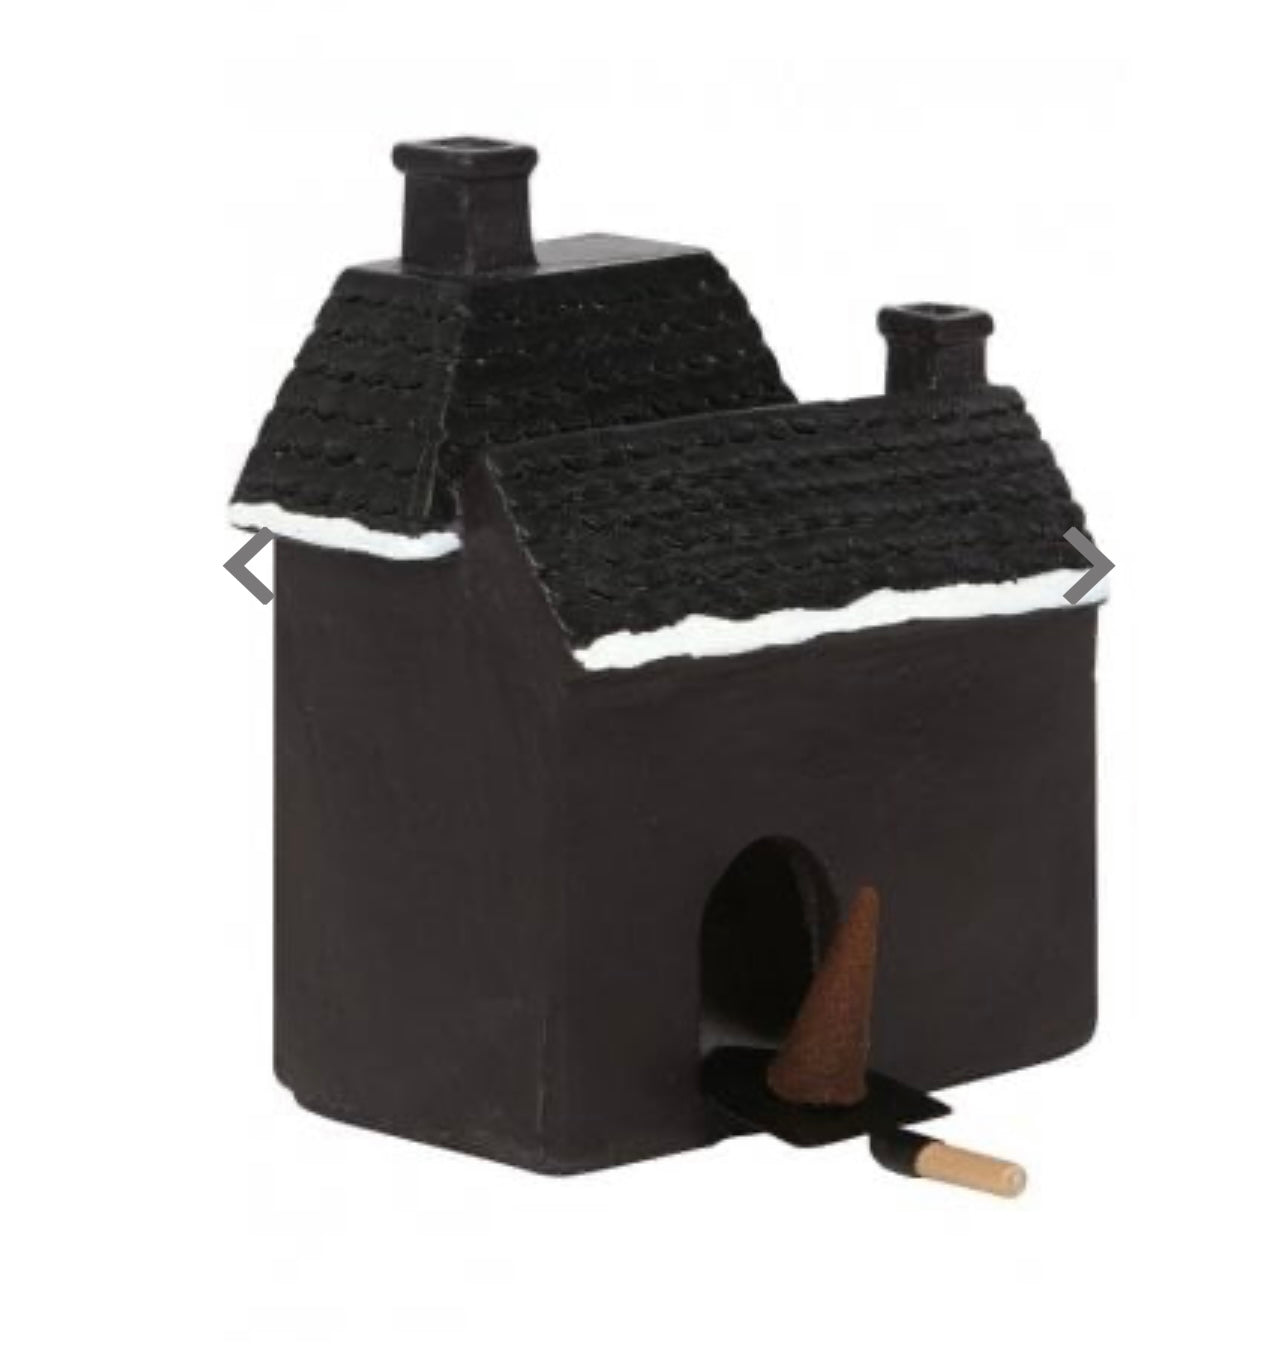 Haunted holiday house incense cone burner